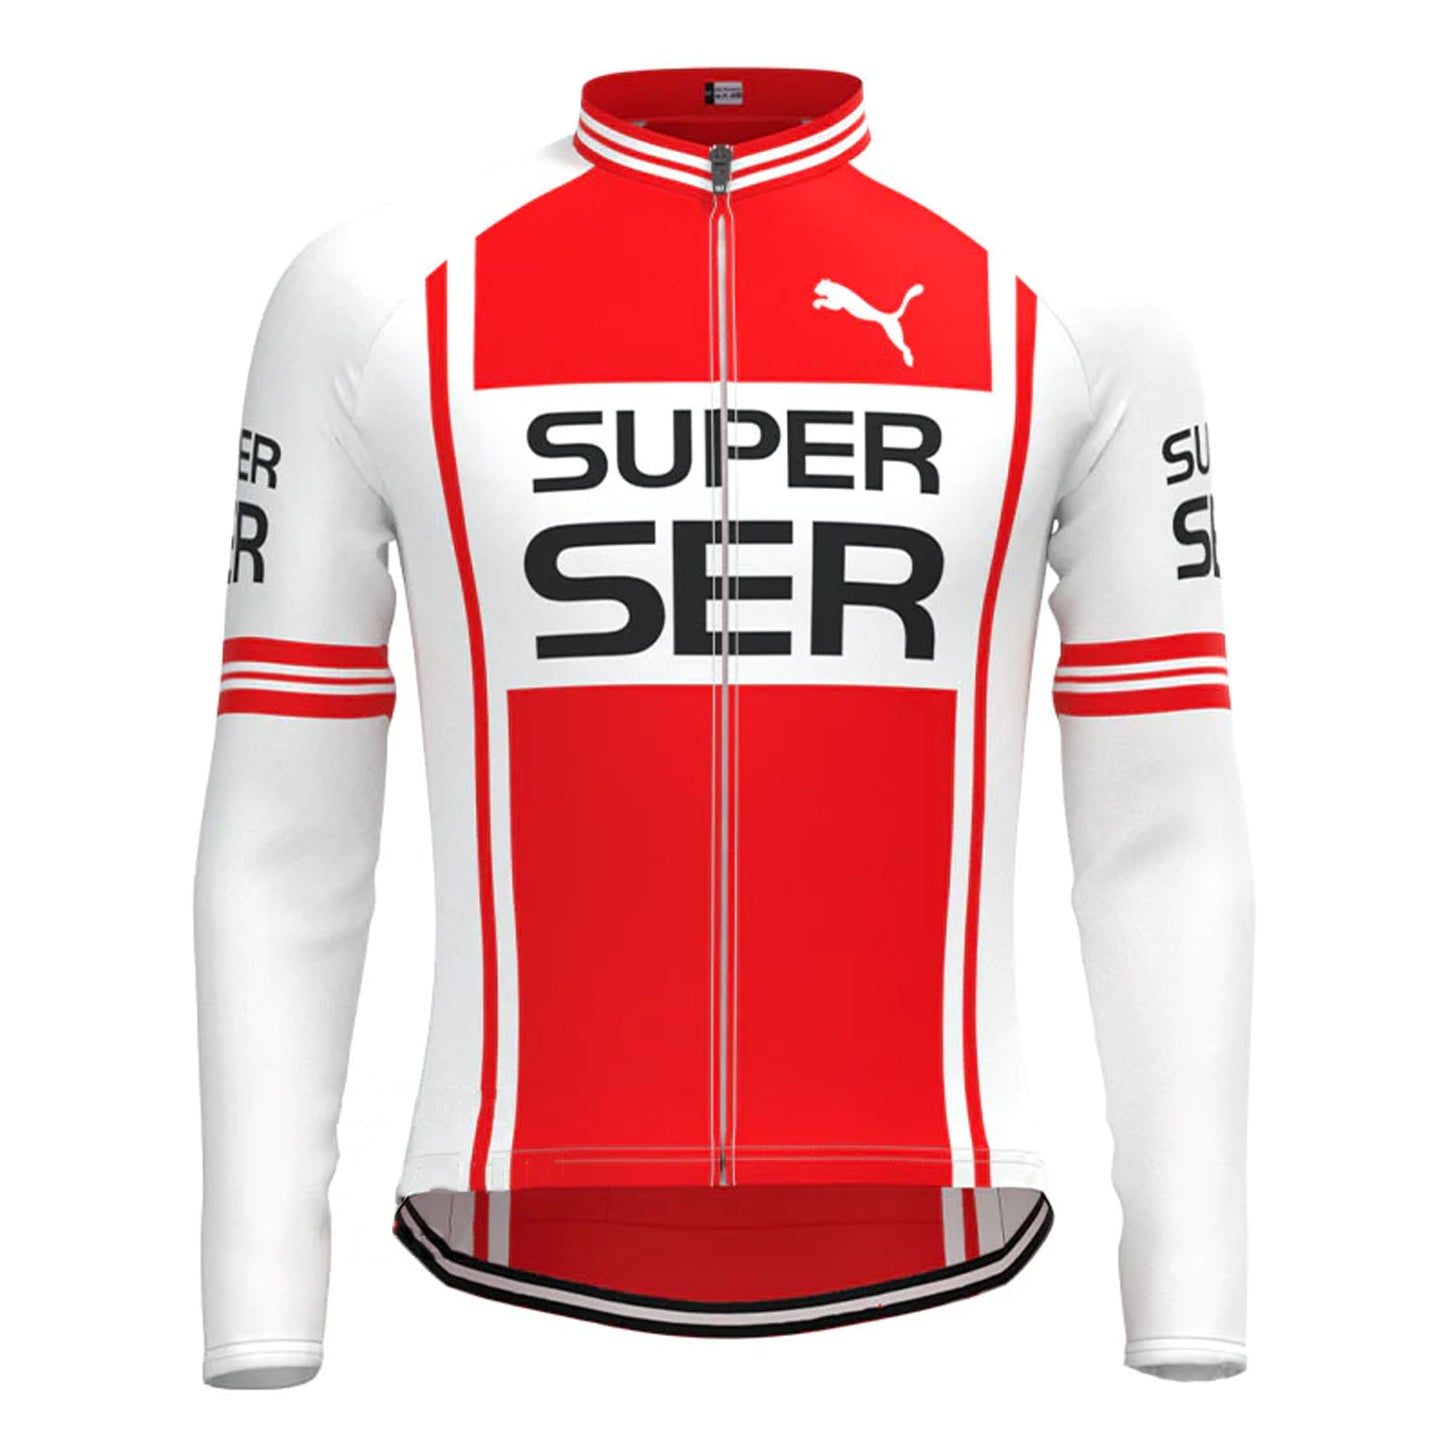 Super Ser White Red Vintage Long Sleeve Cycling Jersey Top